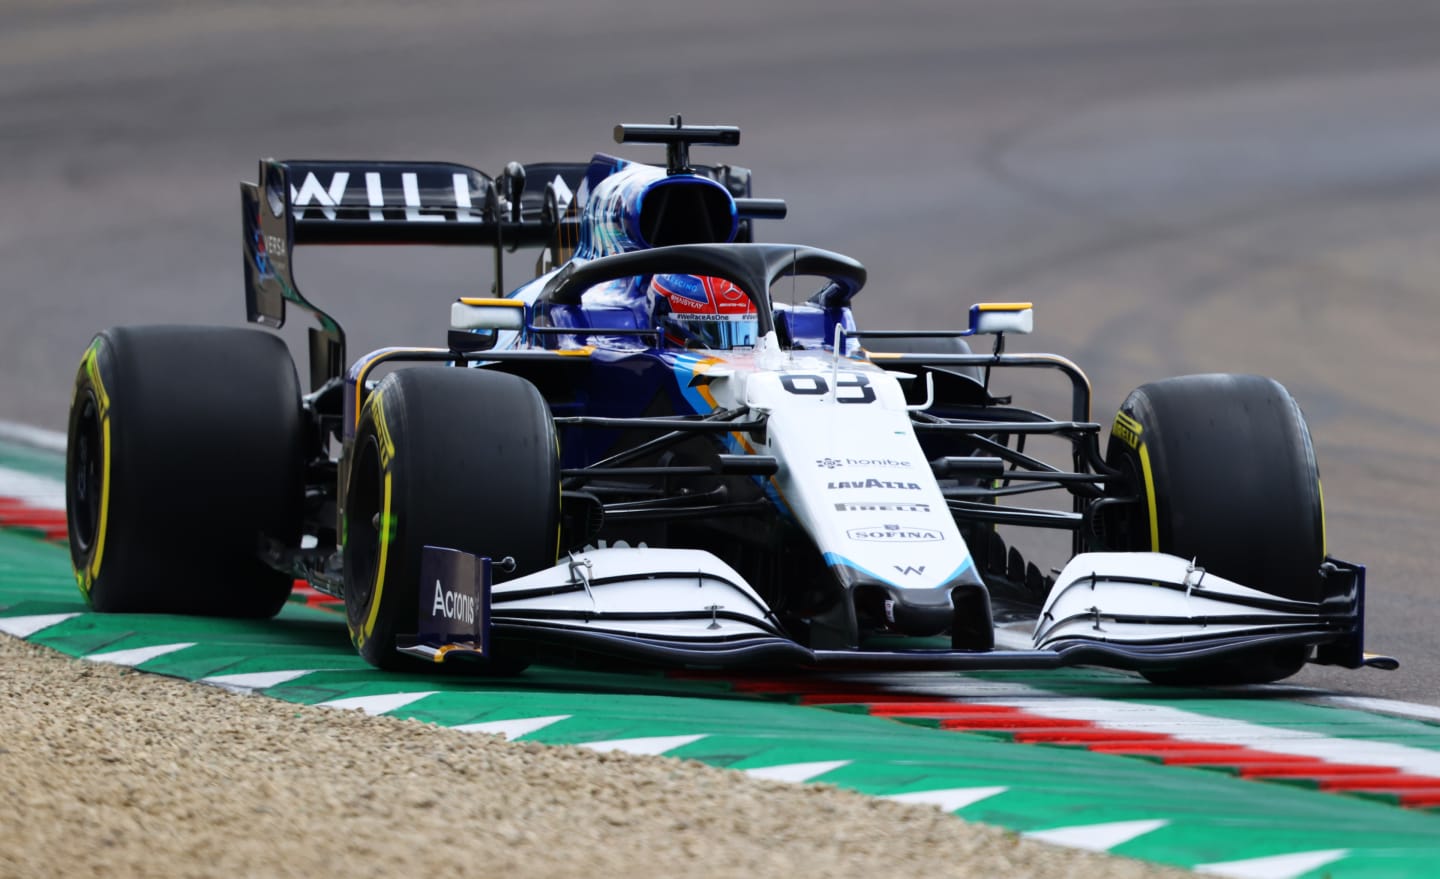 IMOLA, ITALY - APRIL 17: George Russell of Great Britain driving the (63) Williams Racing FW43B Mercedes during qualifying ahead of the F1 Grand Prix of Emilia Romagna at Autodromo Enzo e Dino Ferrari on April 17, 2021 in Imola, Italy. (Photo by Bryn Lennon/Getty Images)